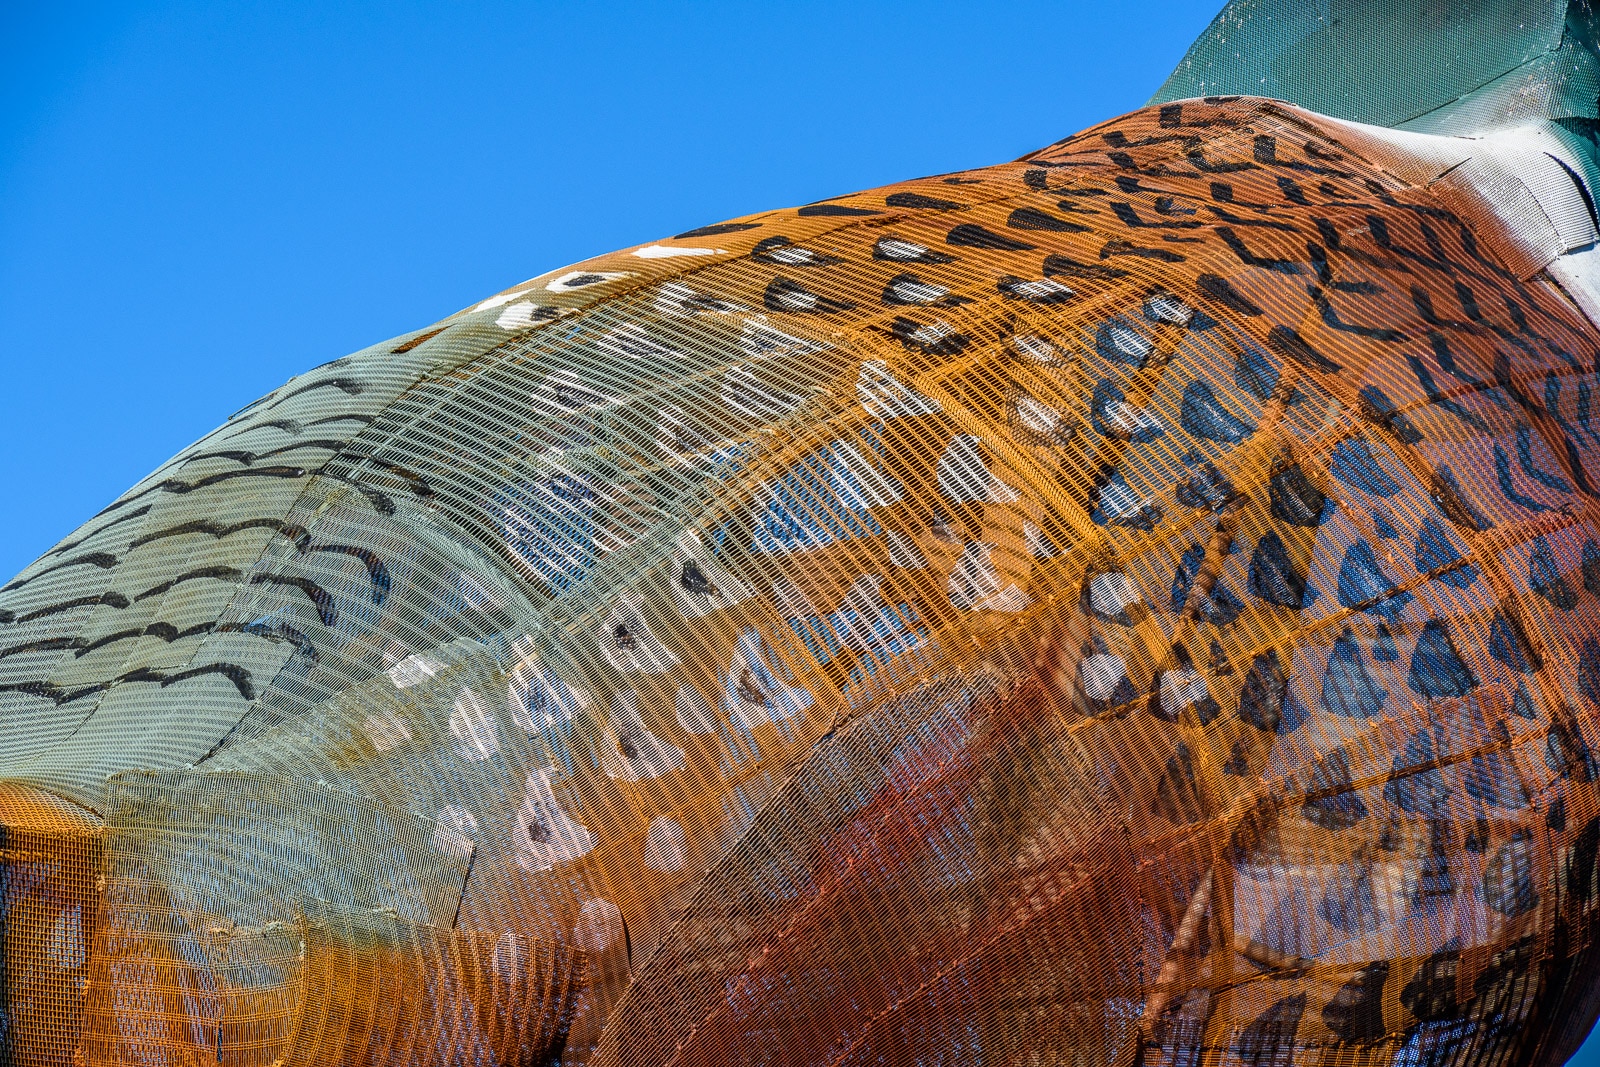 This is a detail of the back feathers on the male pheasant in the sculpture by Gary Greff called Pheasants on the Prairie, located along the Enchanted Highway running between I-94 and Regent, North Dakota.